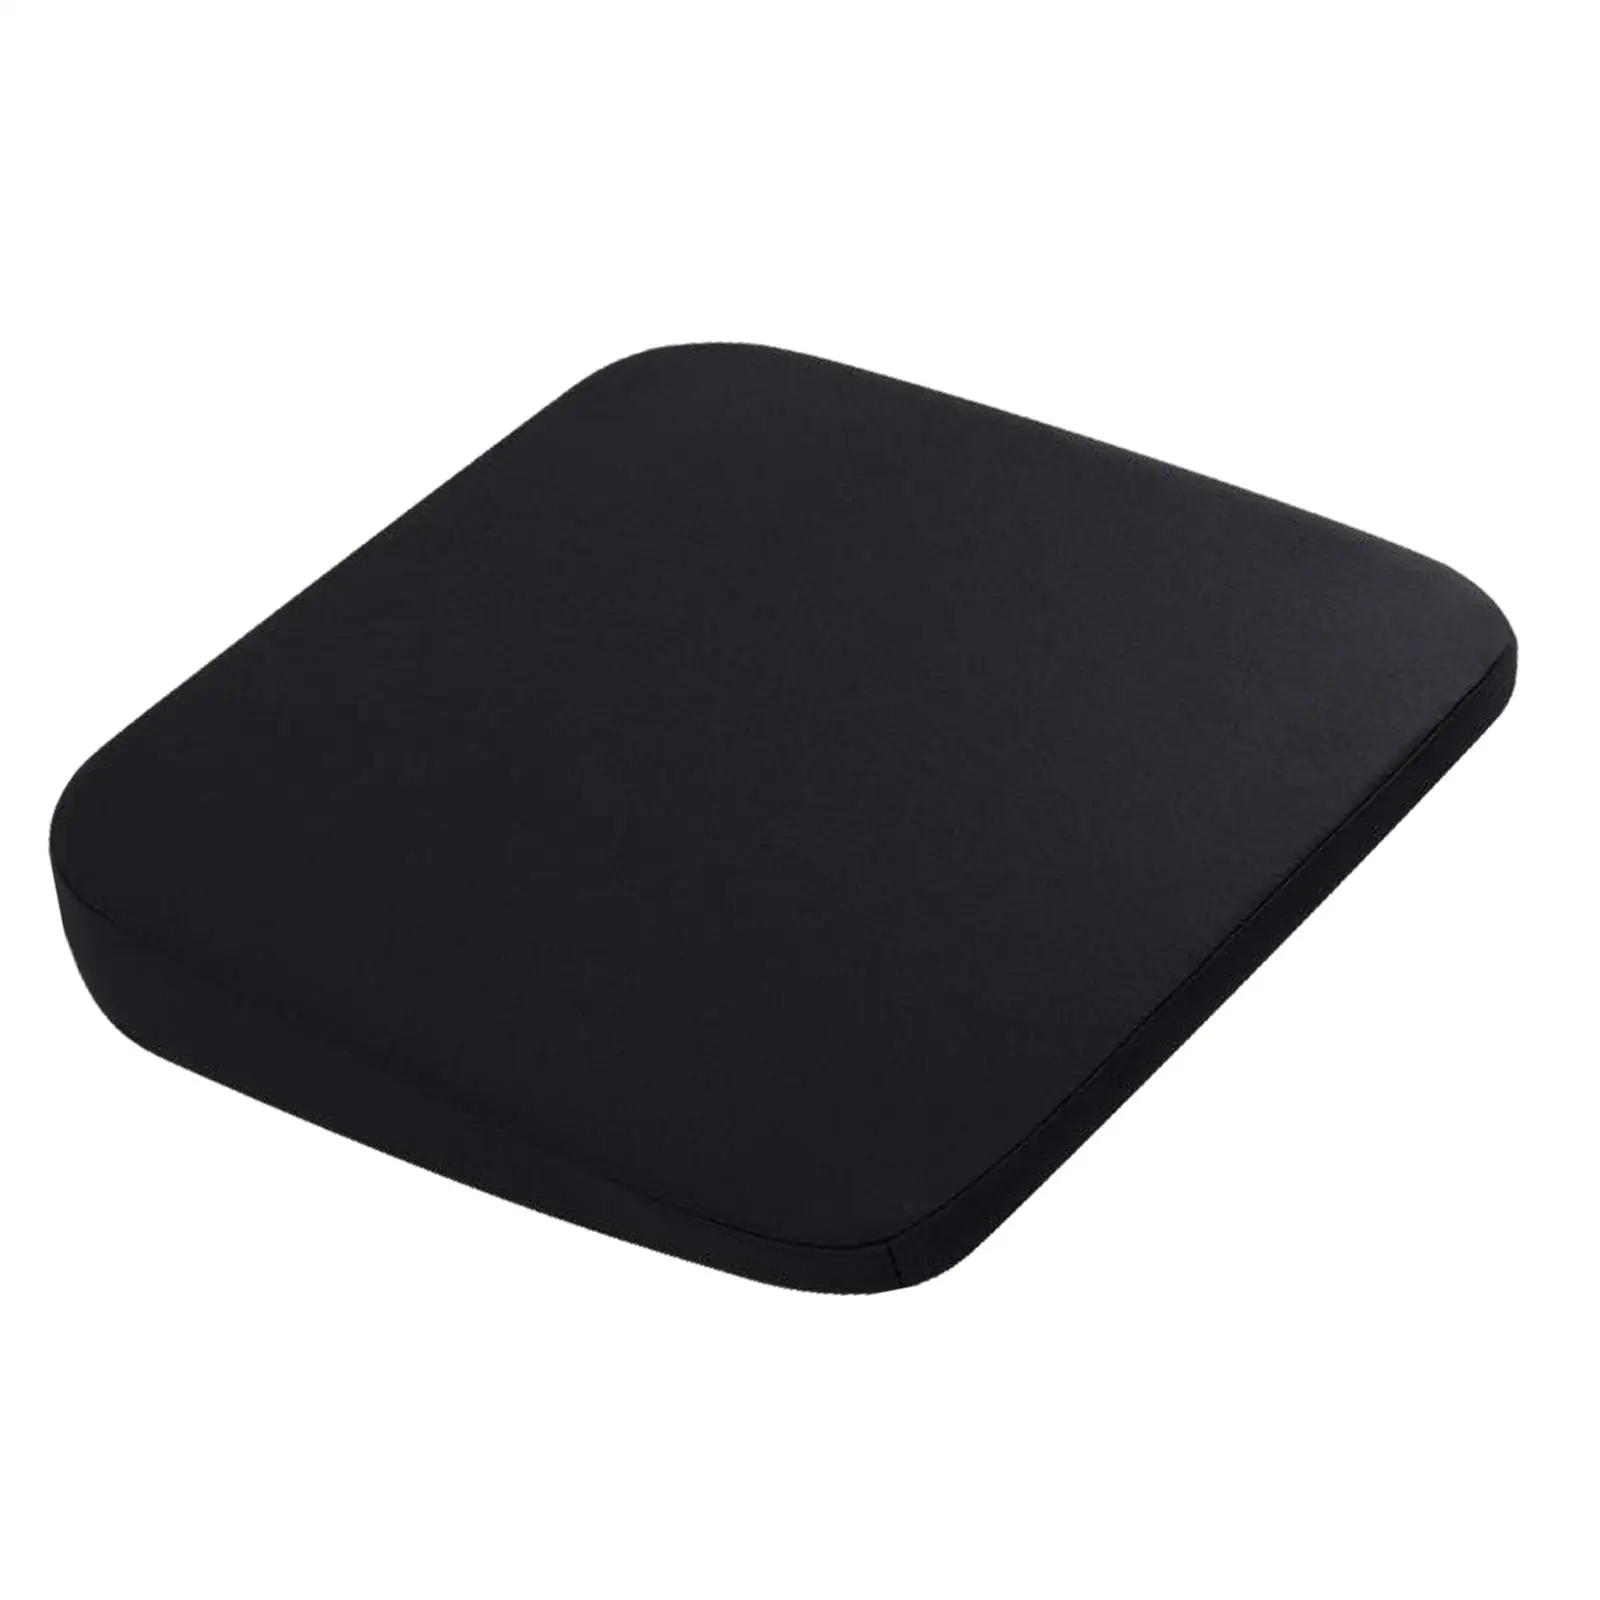 Adult Booster Seat for Car Bevel Auto Seat Pad Breathable Protector Anti Slip Comfortable Seat Mat Office/Home Chair Seat